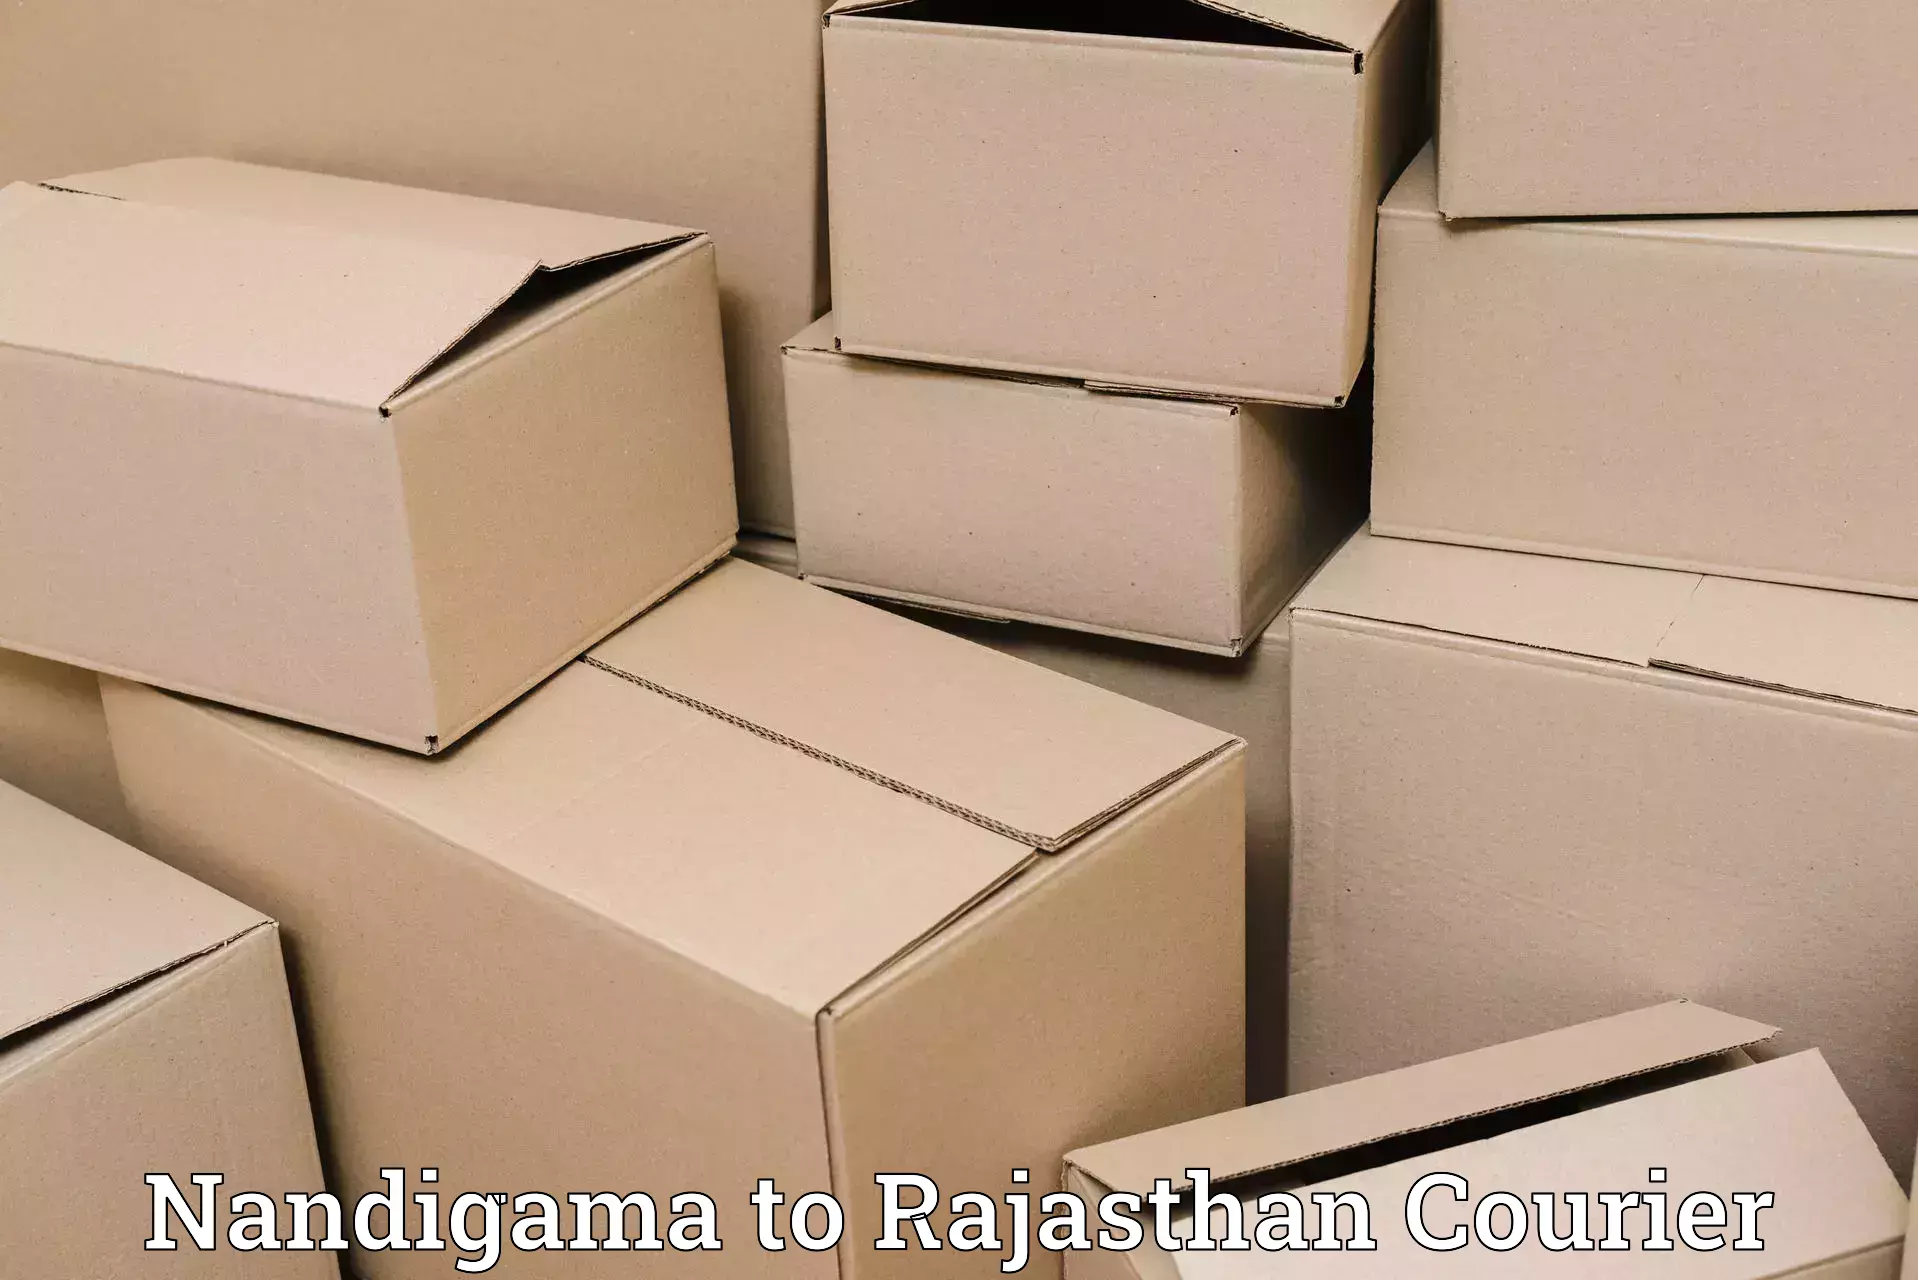 Package delivery network Nandigama to Mandalgarh